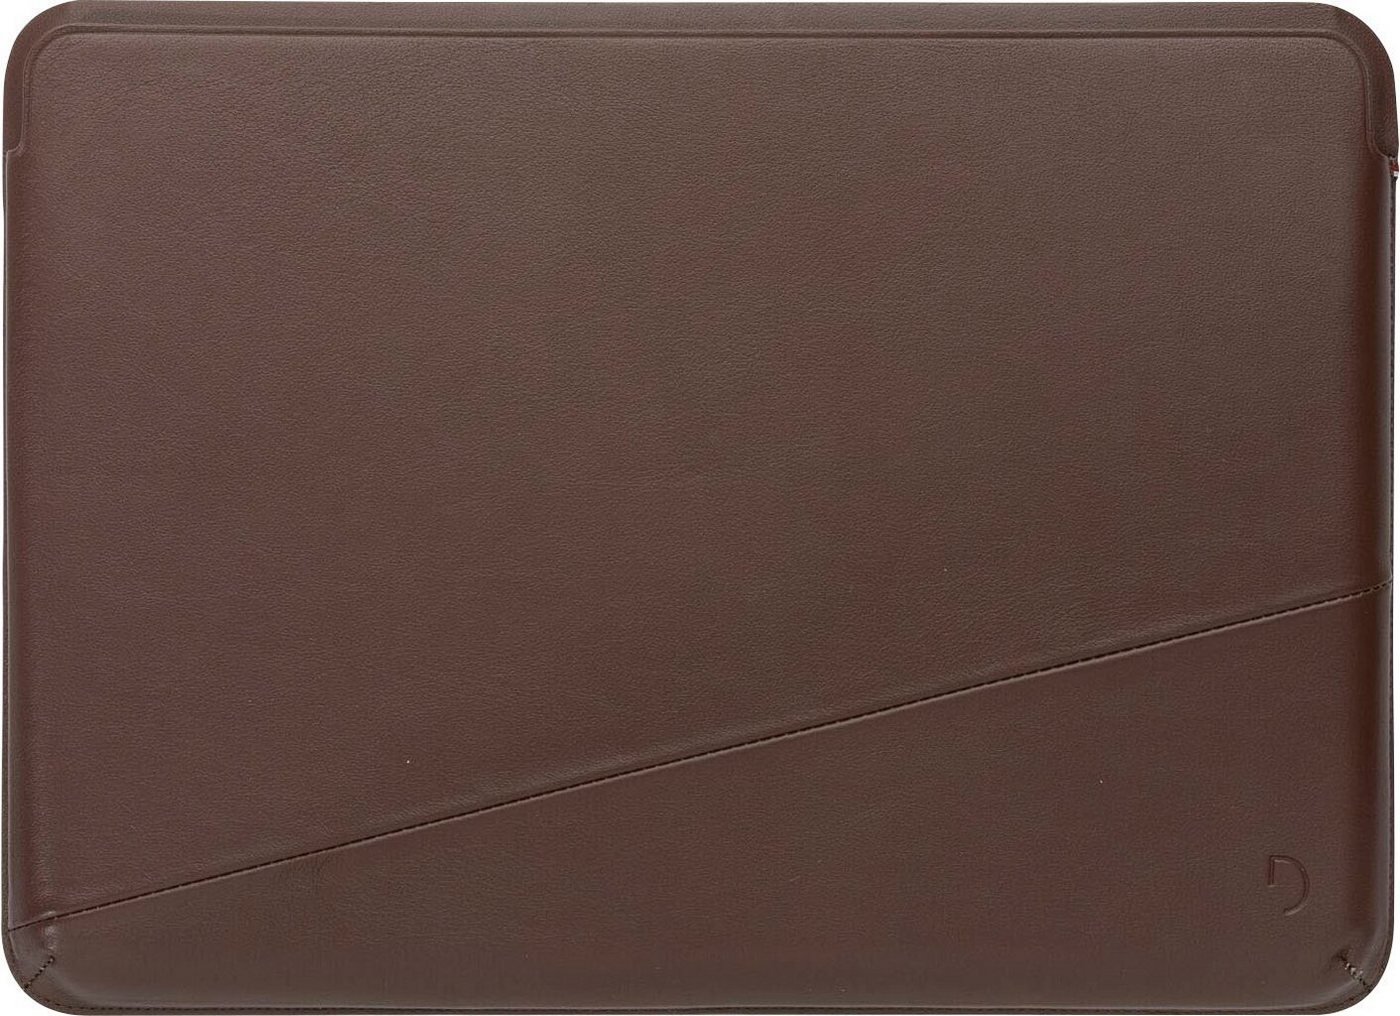 DECODED Laptop-Hülle Leather Frame Sleeve for Macbook 16 inch 40,6 cm (16 Zoll) von DECODED